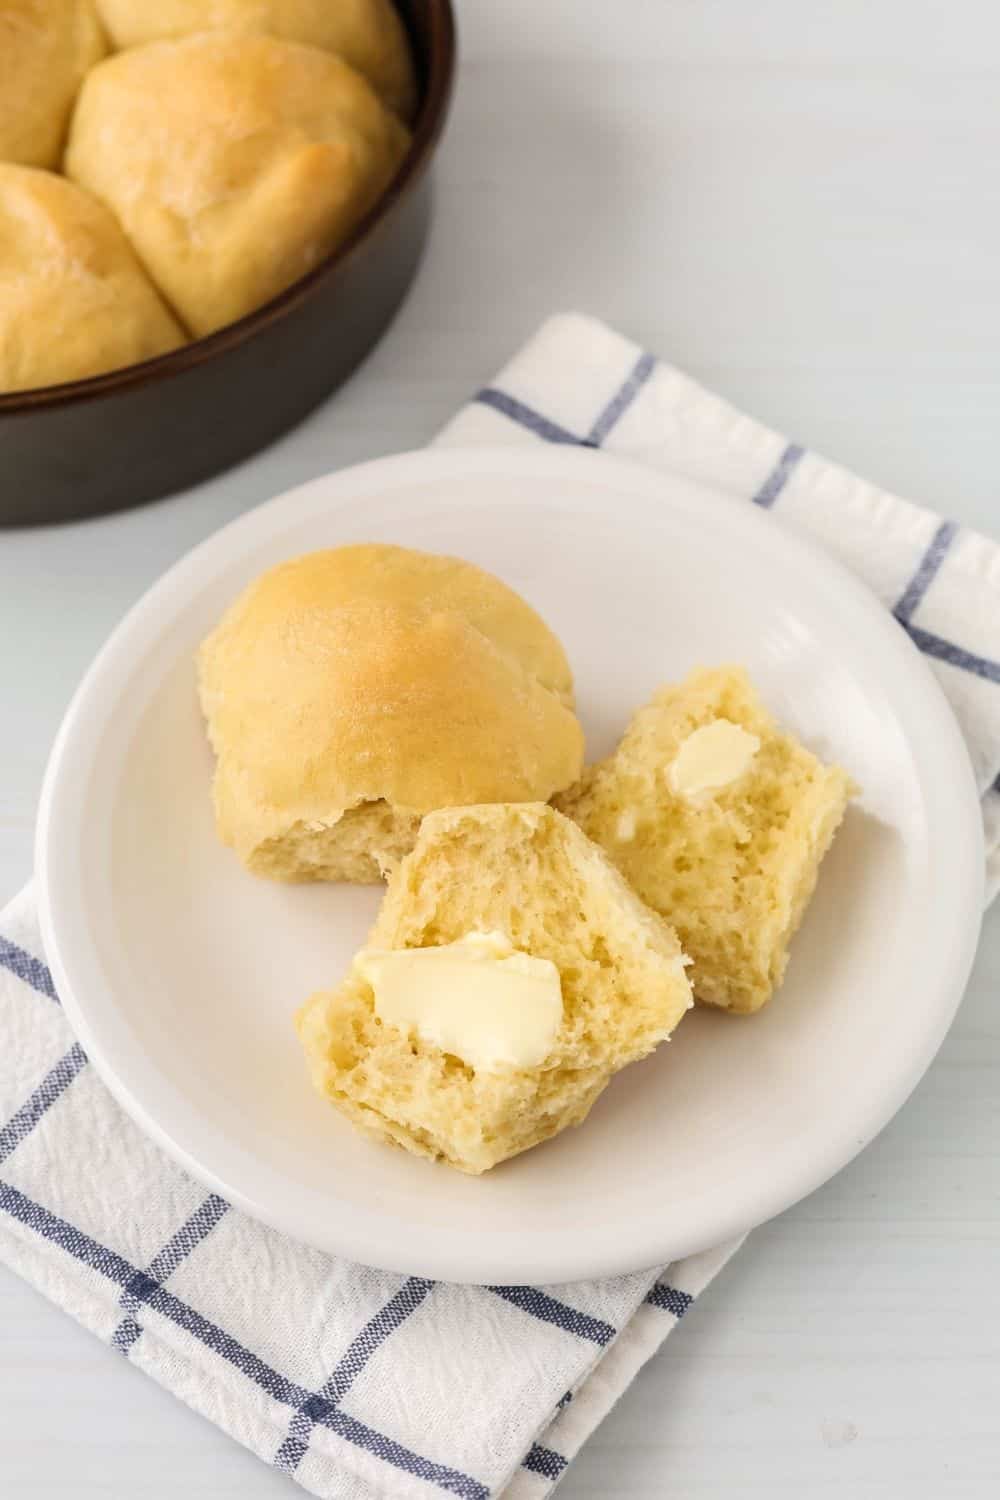 two homemade dinner rolls (that were previously proofed in the instant pot) served on a white plate, with the remaining pan of rolls in the background.